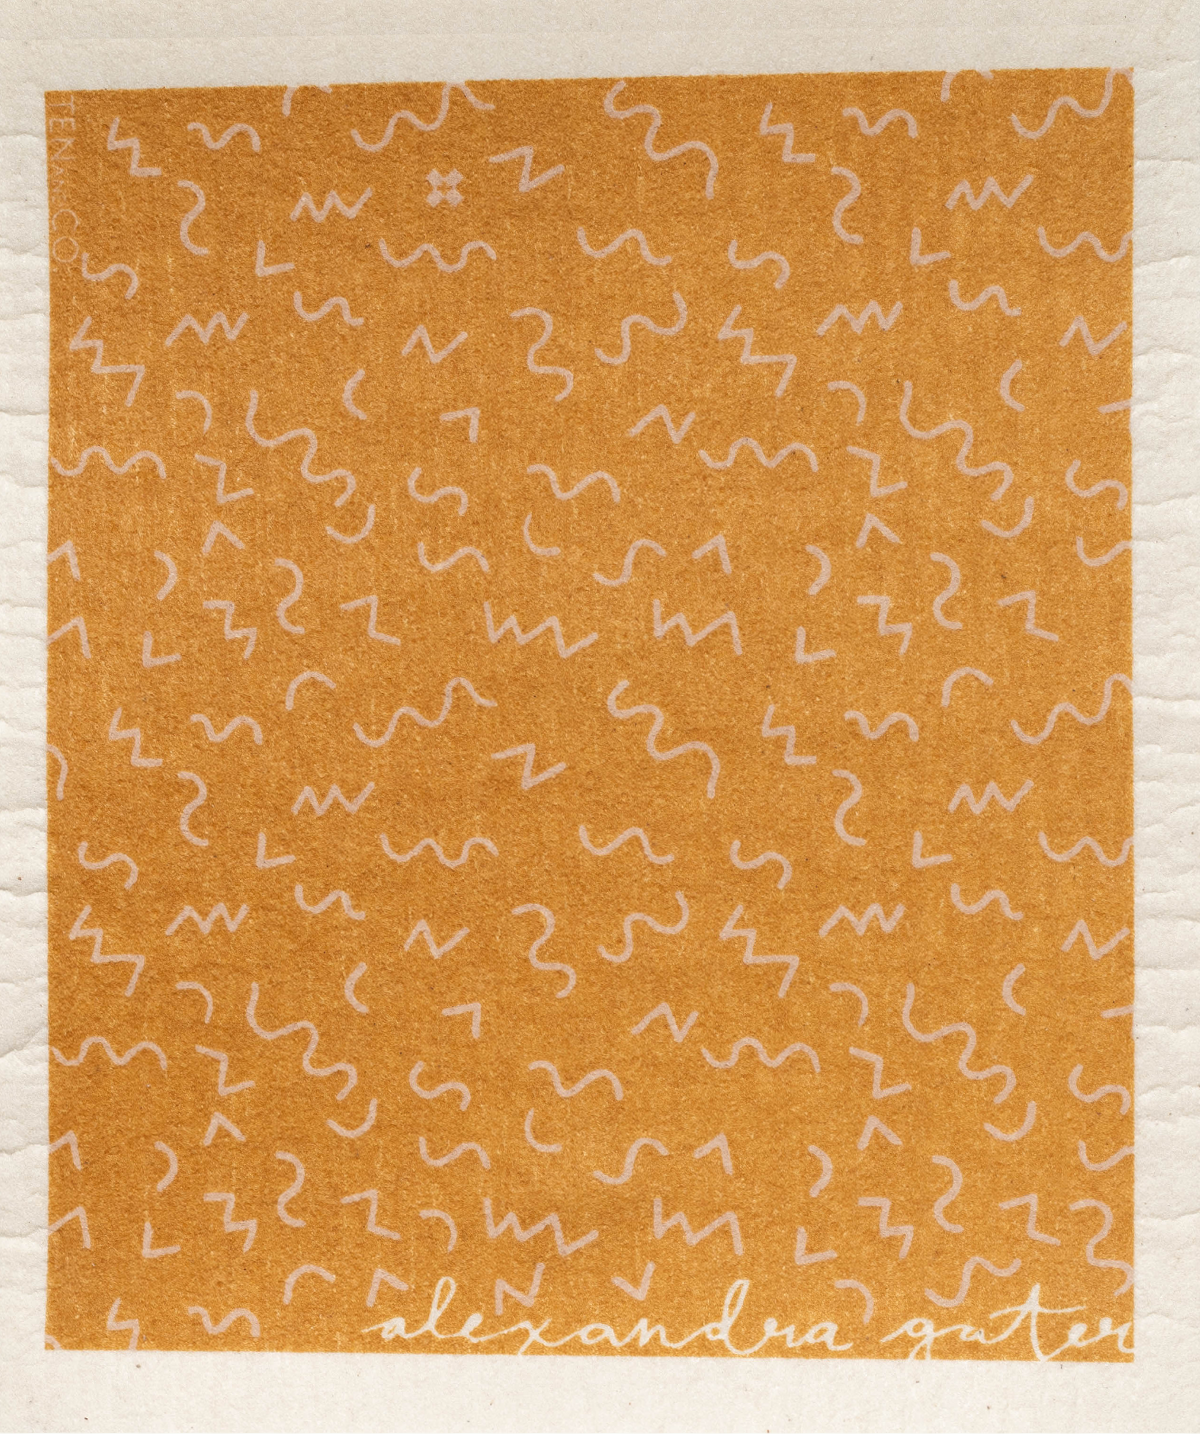 Ten and Co. Squiggle Sponge Cloth